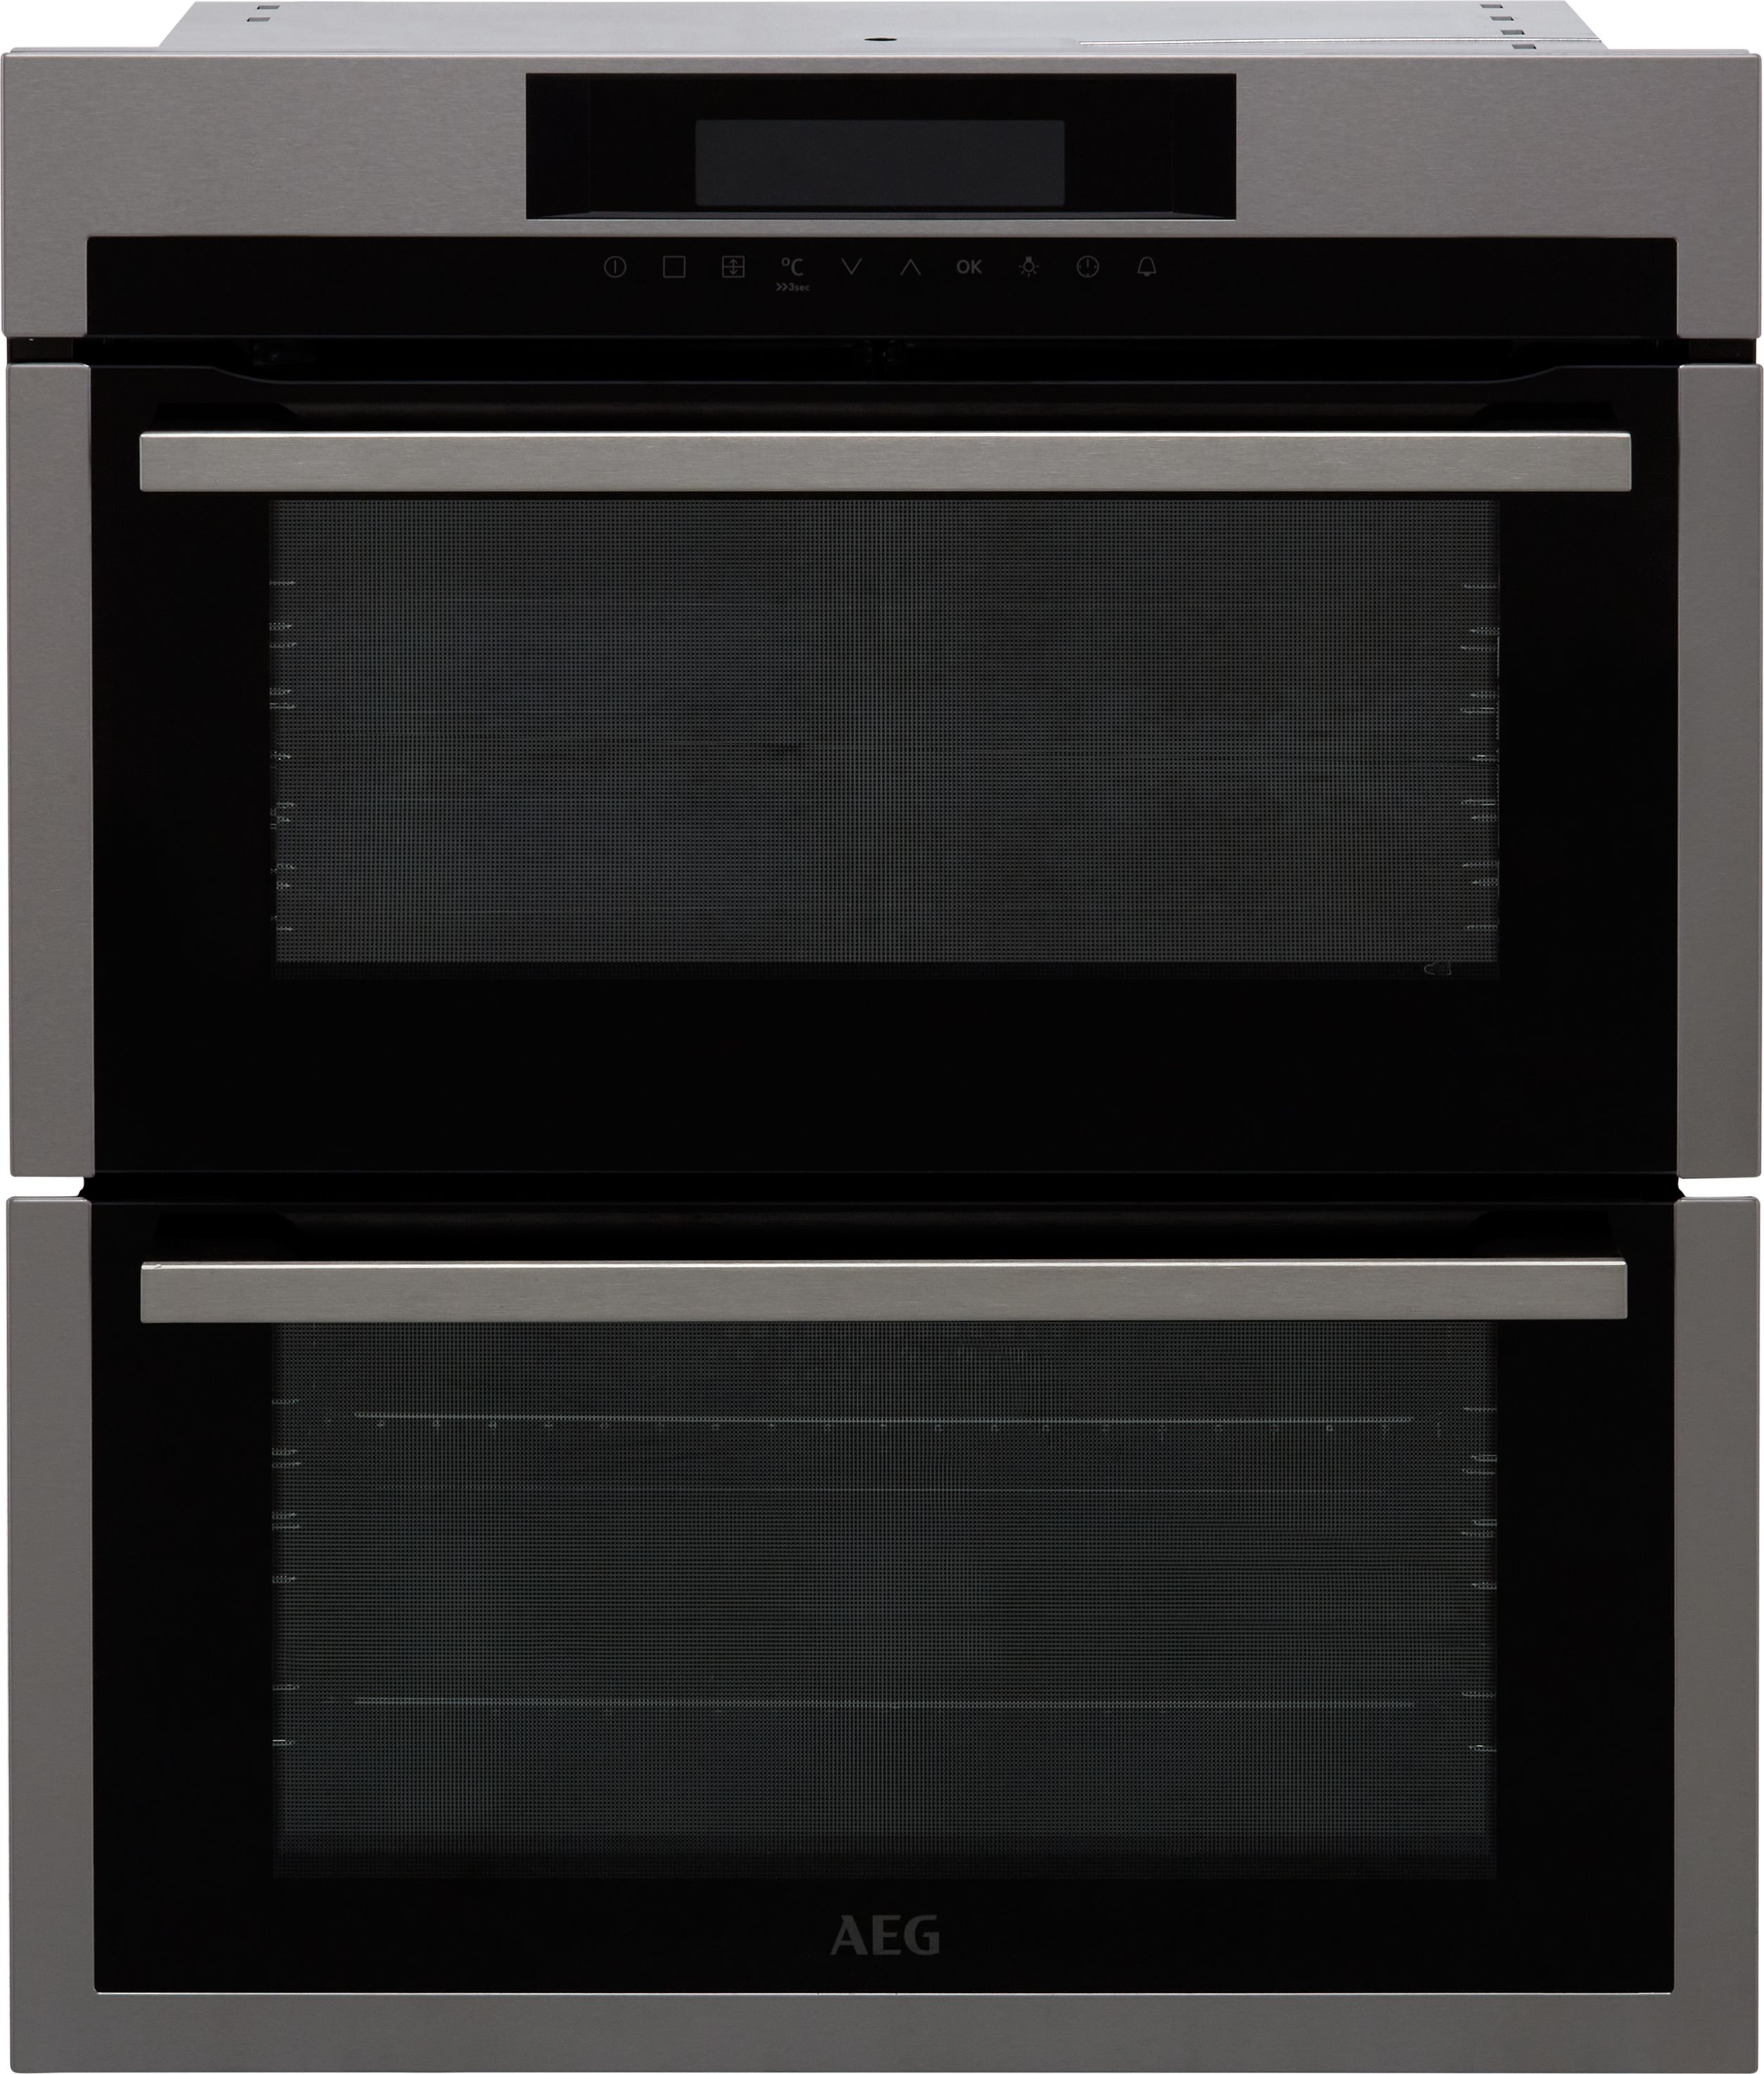 AEG DUE731110M Built Under Electric Double Oven - Stainless Steel - A/A Rated, Stainless Steel